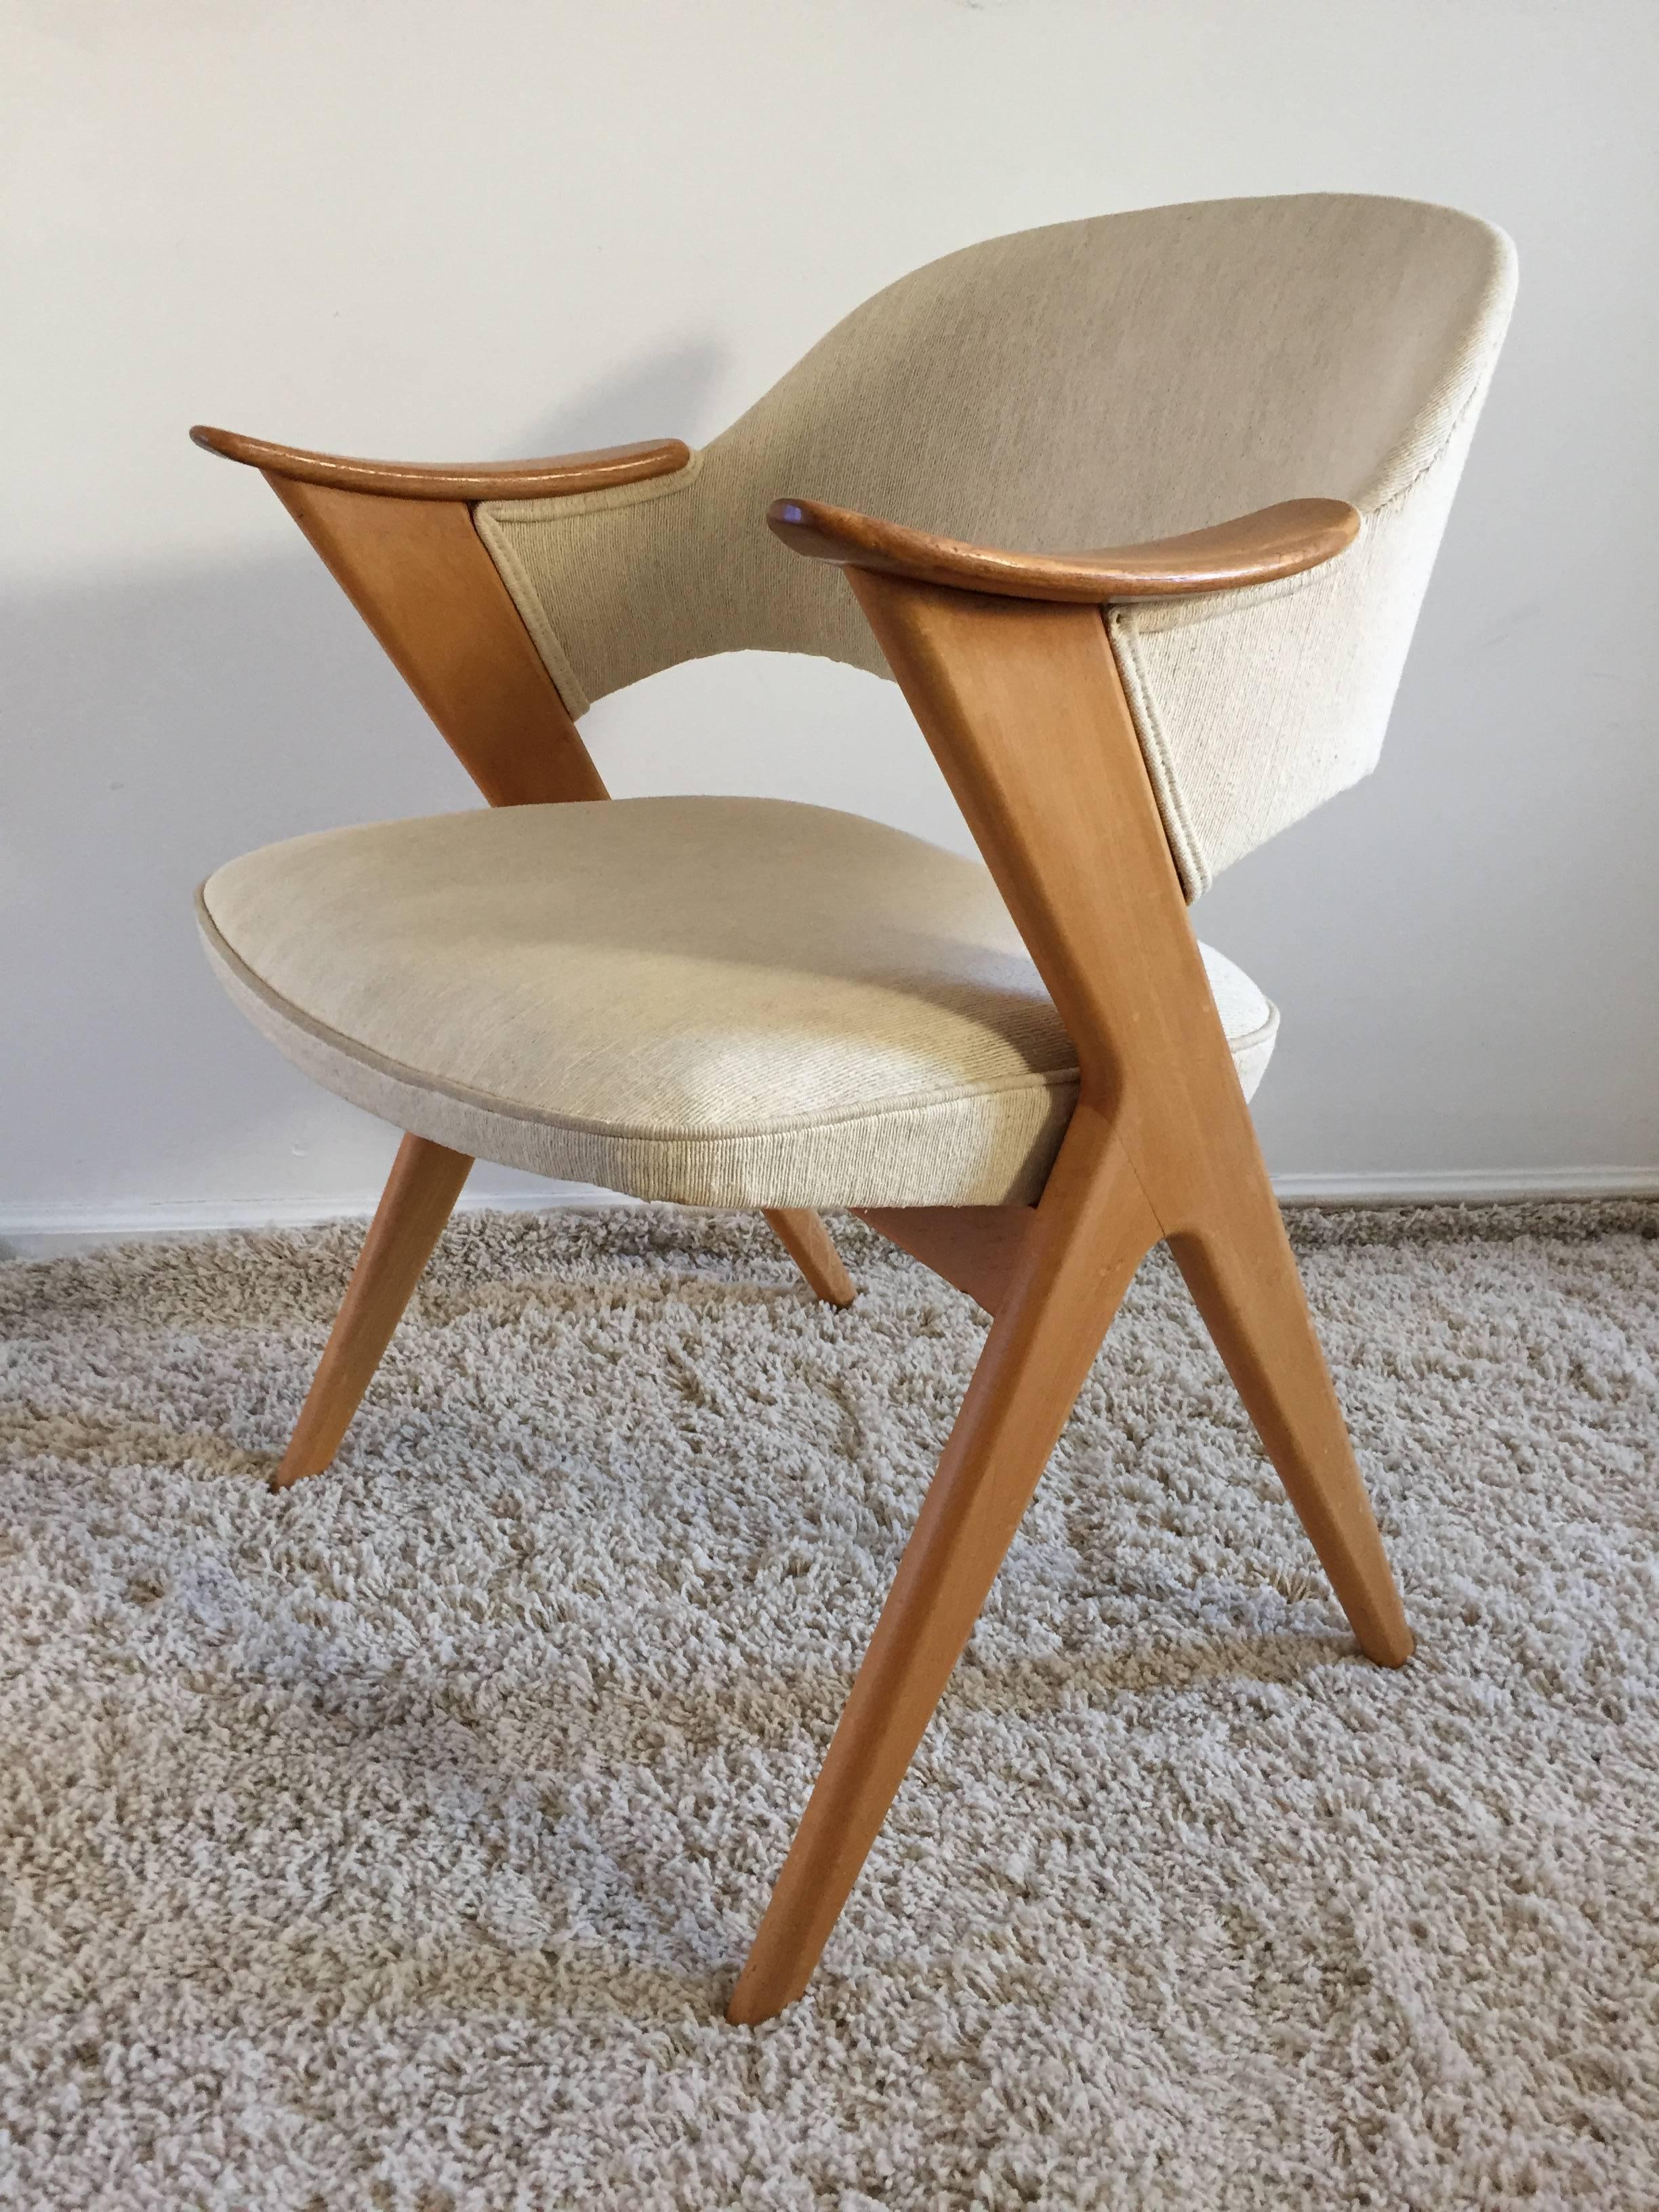 Pair Svante Skogh Scandinavian oak scissor chairs, in original ribber off-white fabric and wood finish, wonderful lines and curved arms and back for comfort, great office chair.